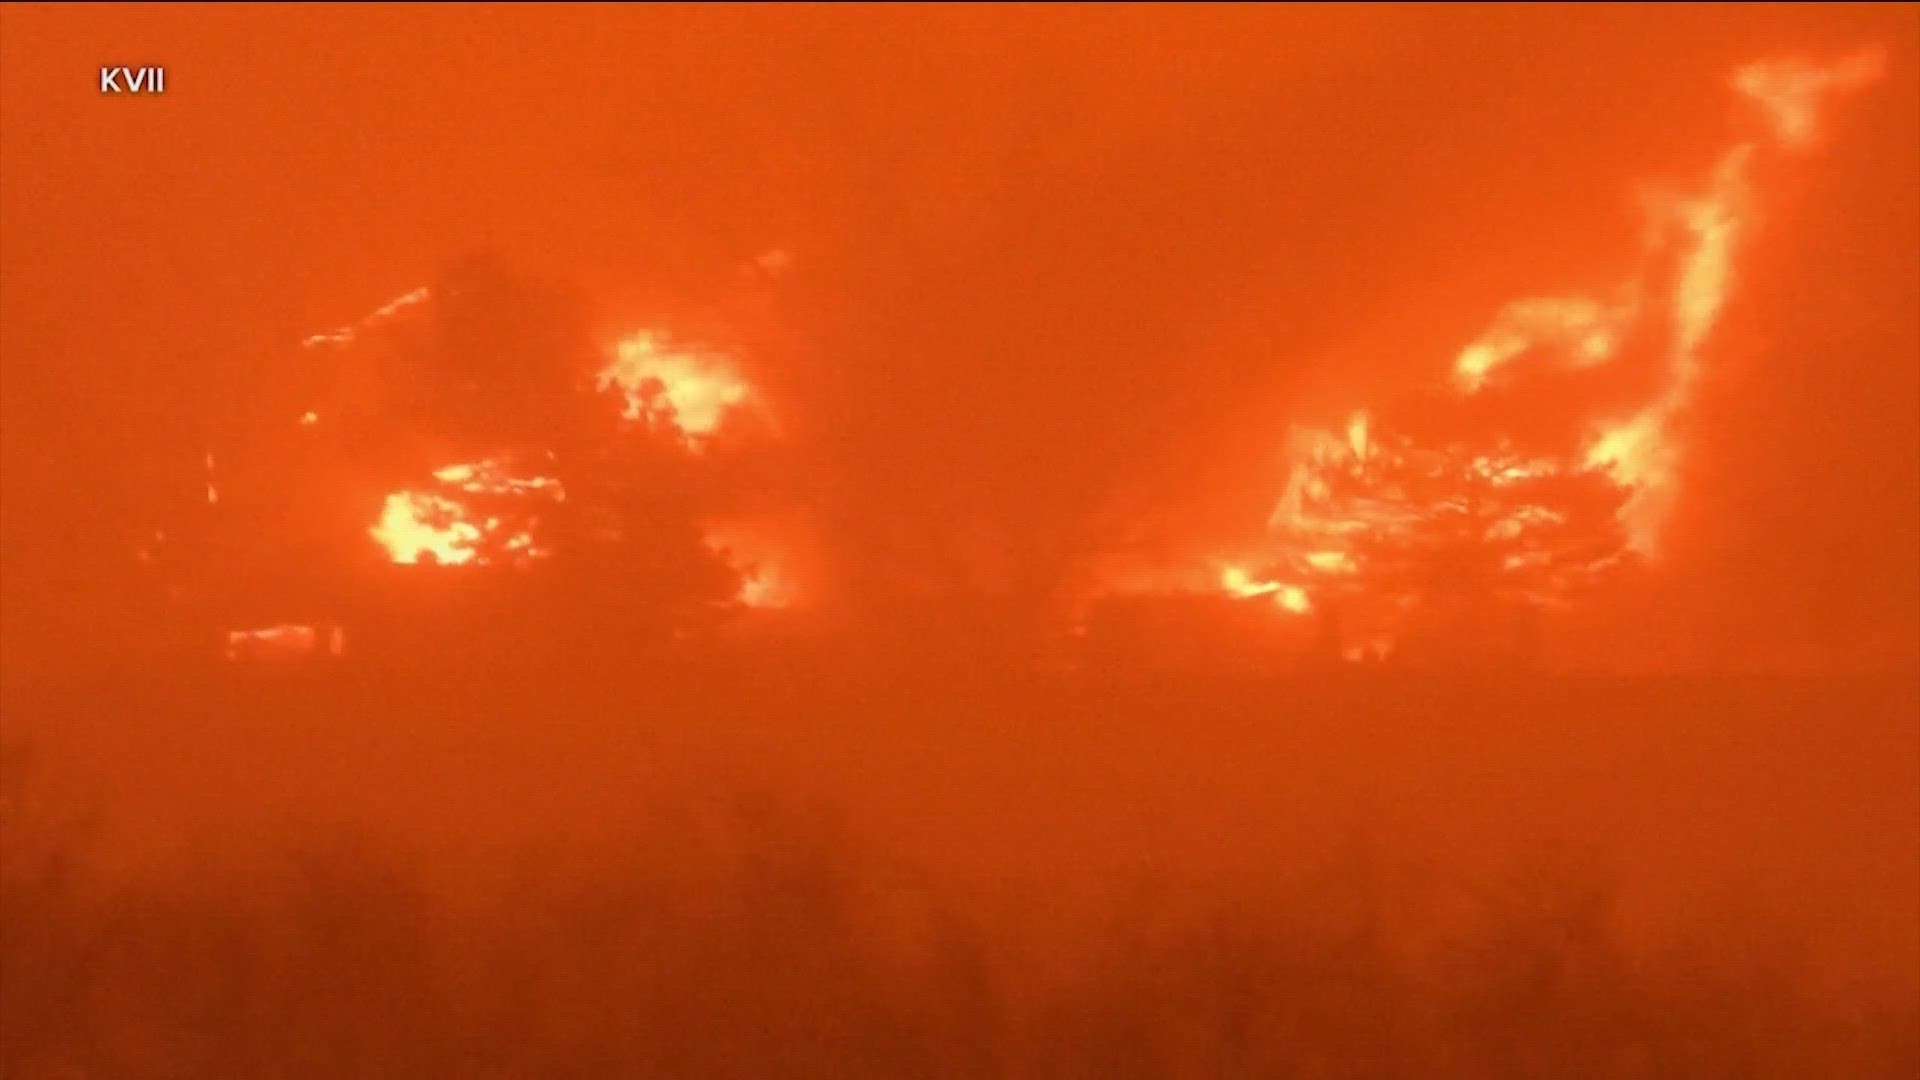 Texas lawmakers will investigate the historic wildfires in the Panhandle. Texas House Speaker Dade Phelan announced the new investigative committee on Tuesday.